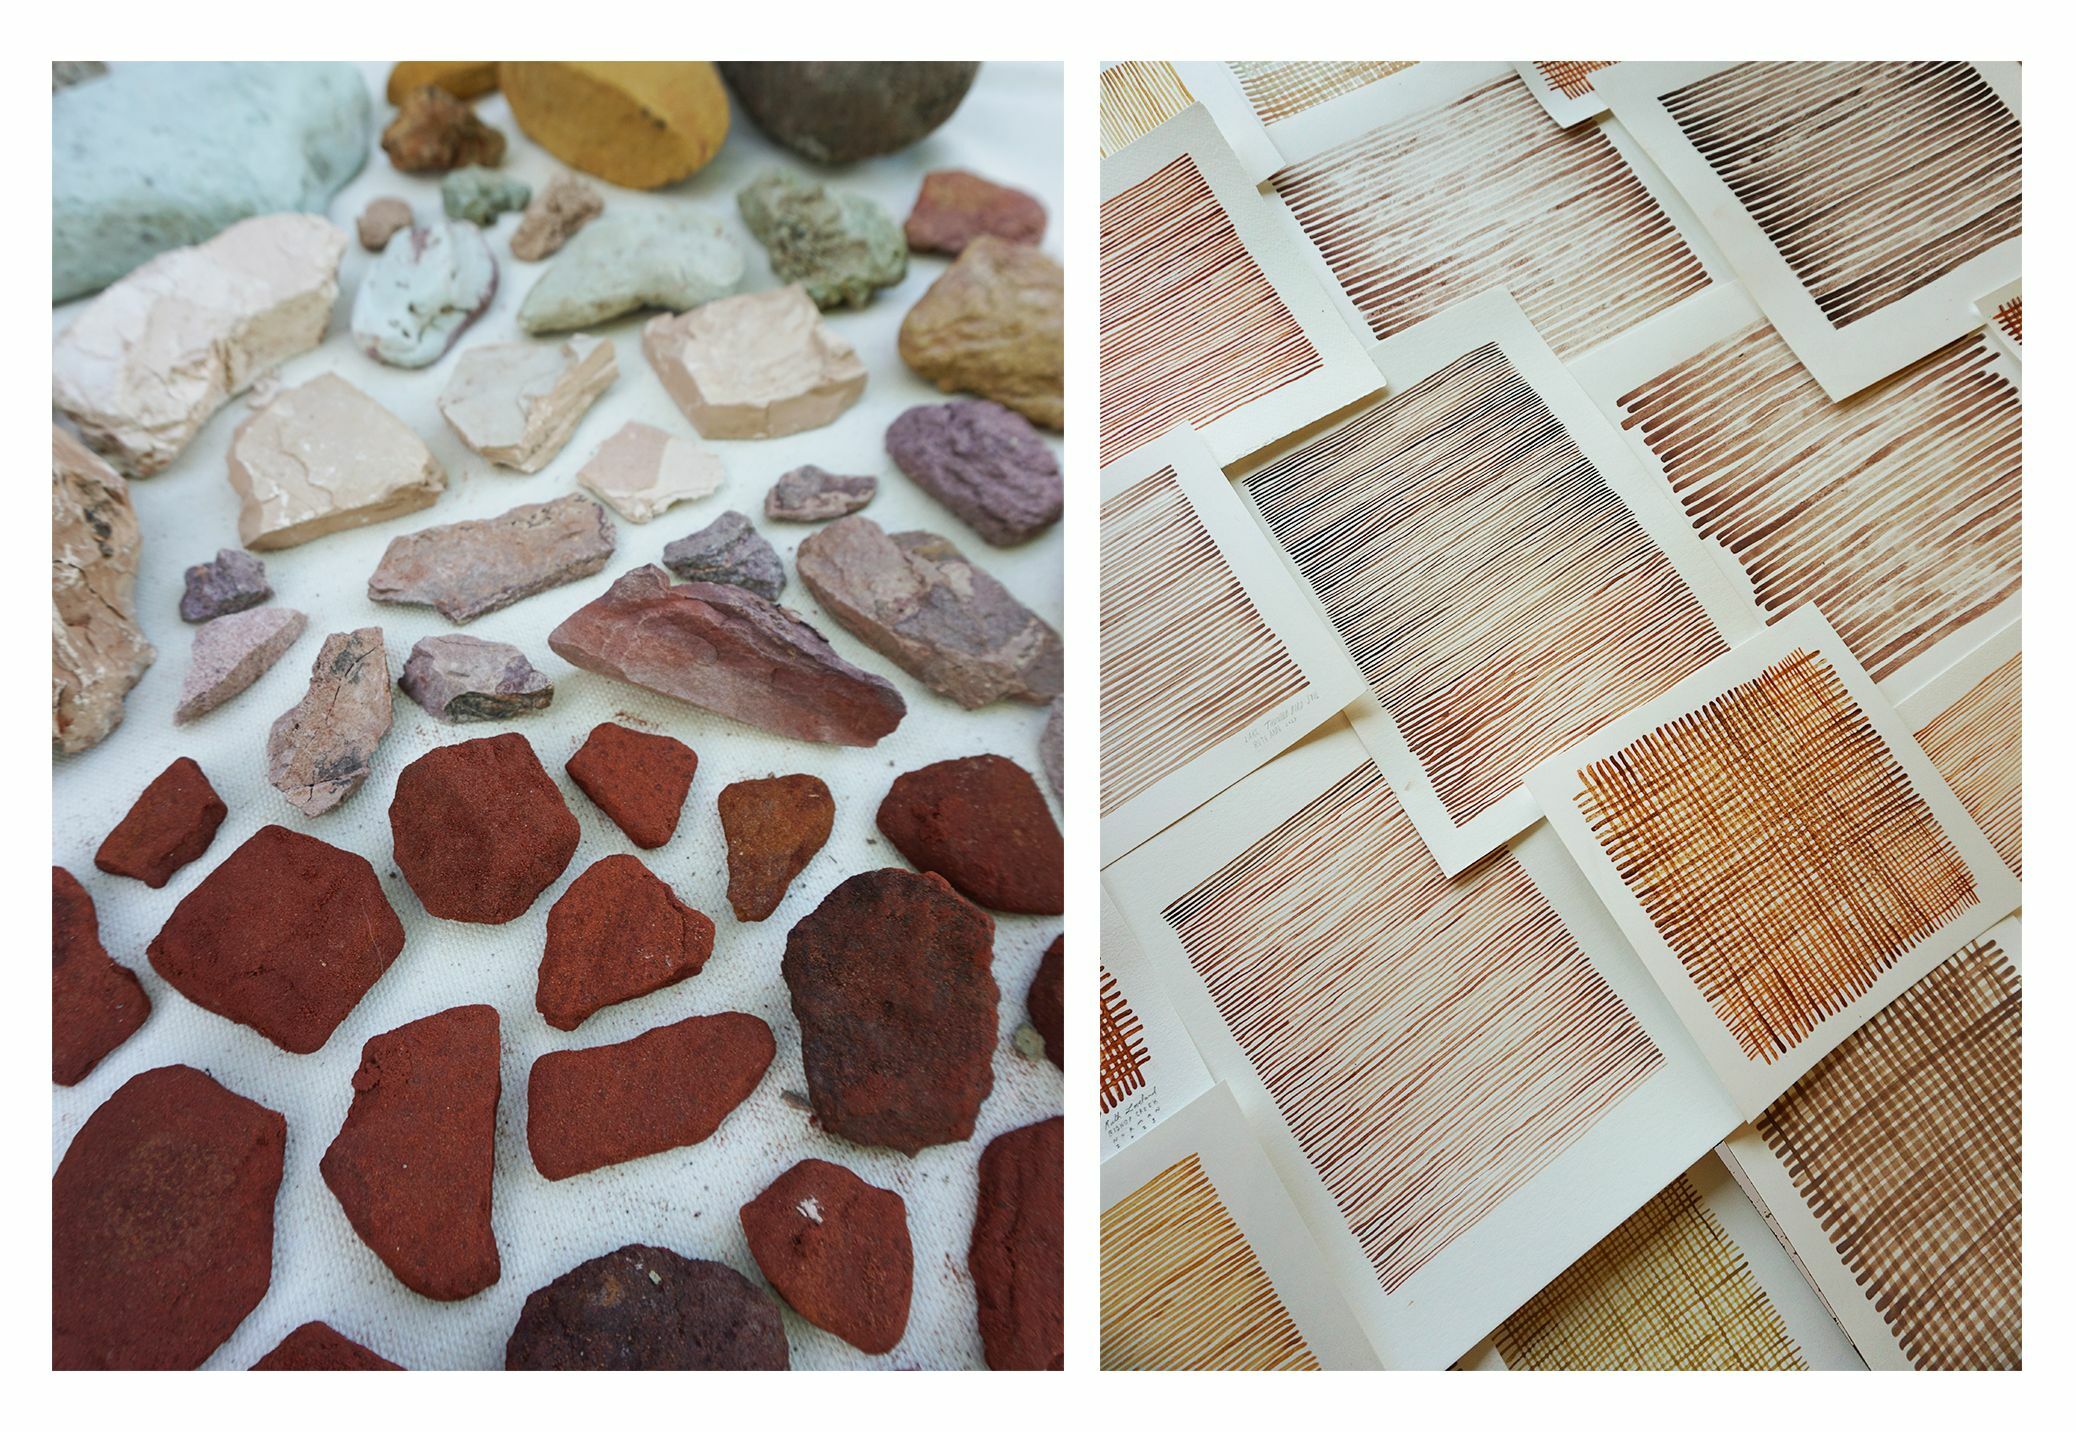 A split image showing various rocks and red soil samples on the left and color samples of the same pigments on the right